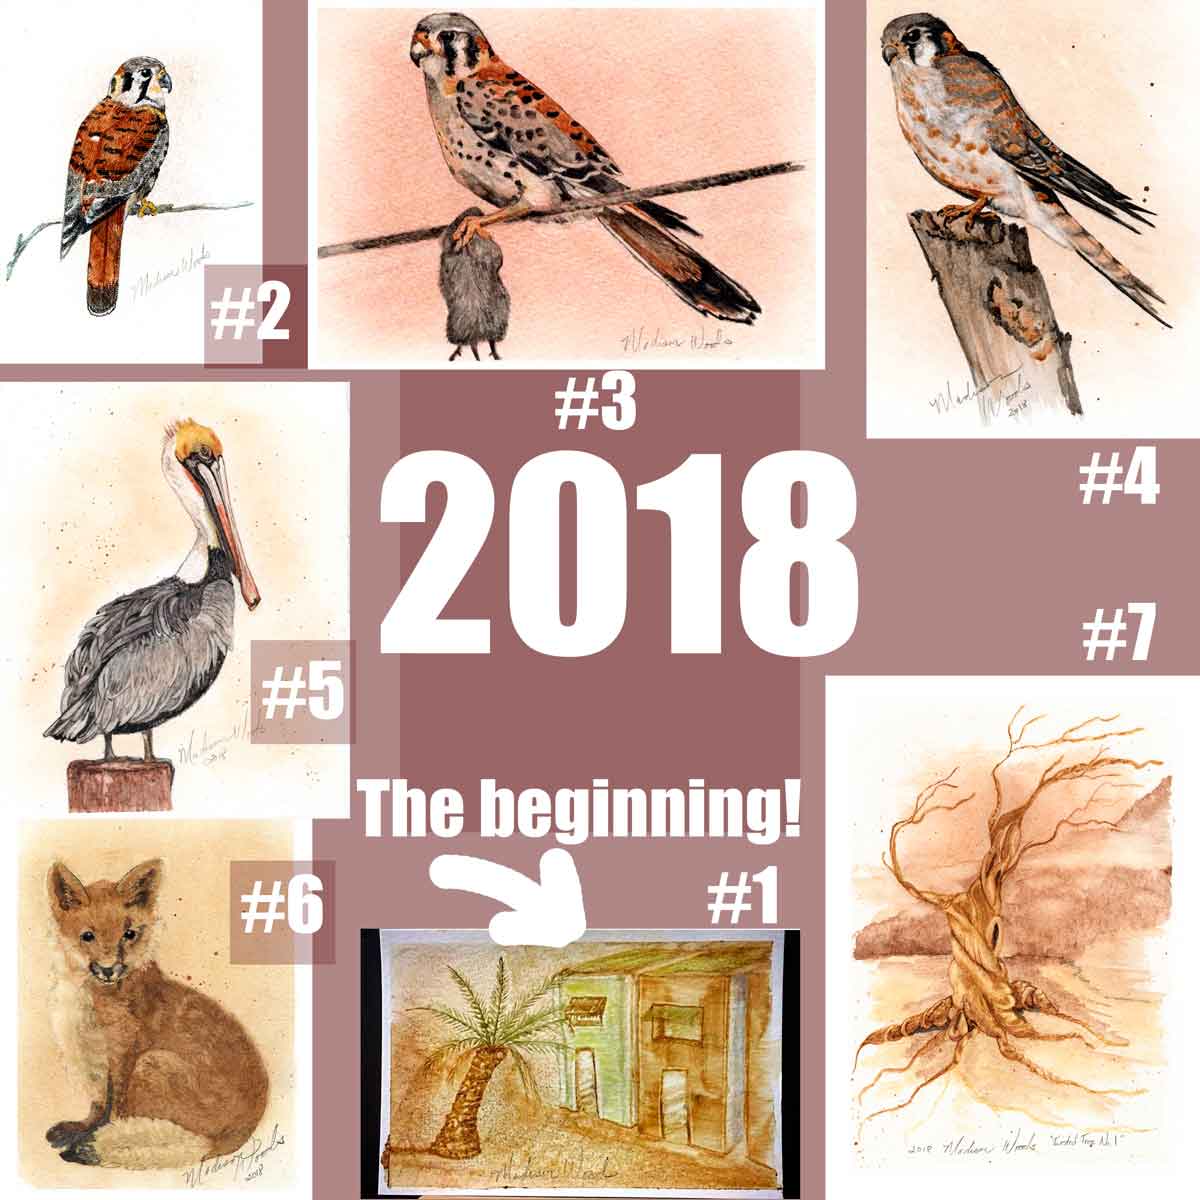 Summary of my 2018 paintings. This is the first year of my journey as an artist painting with local pigments.